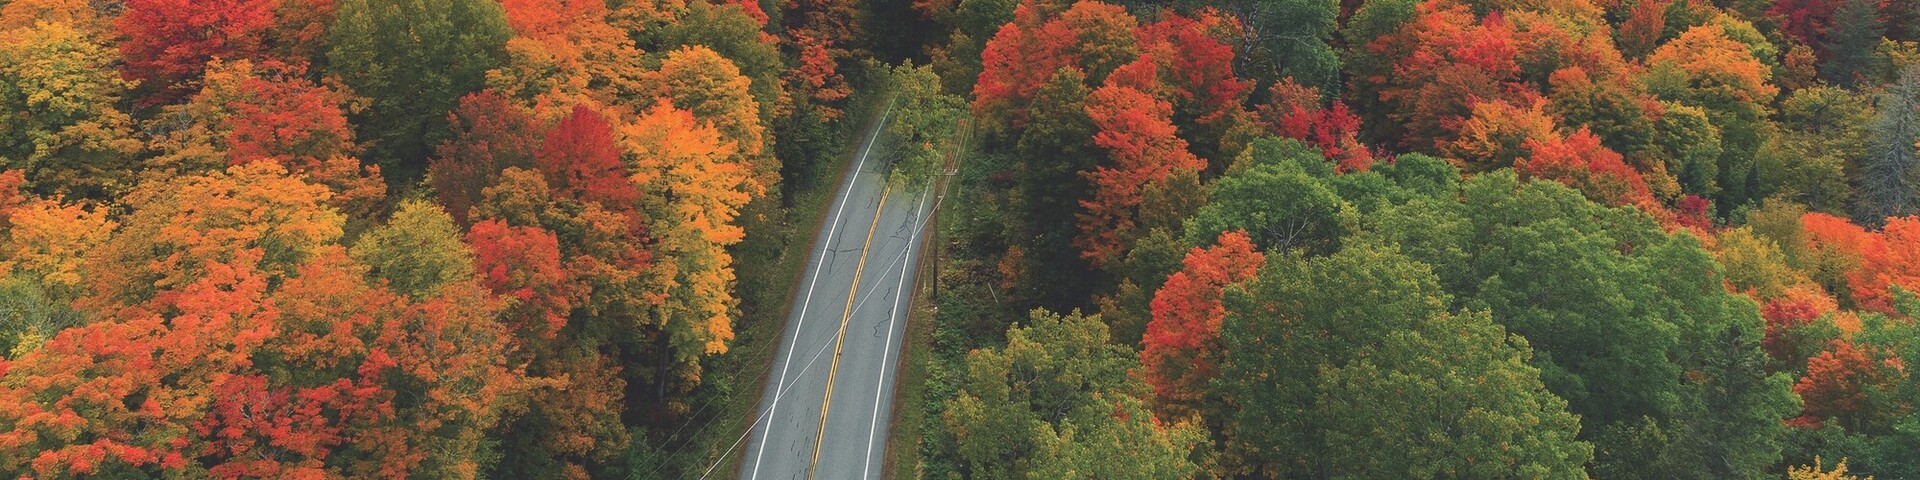 meandering road through Vermont fall foliage